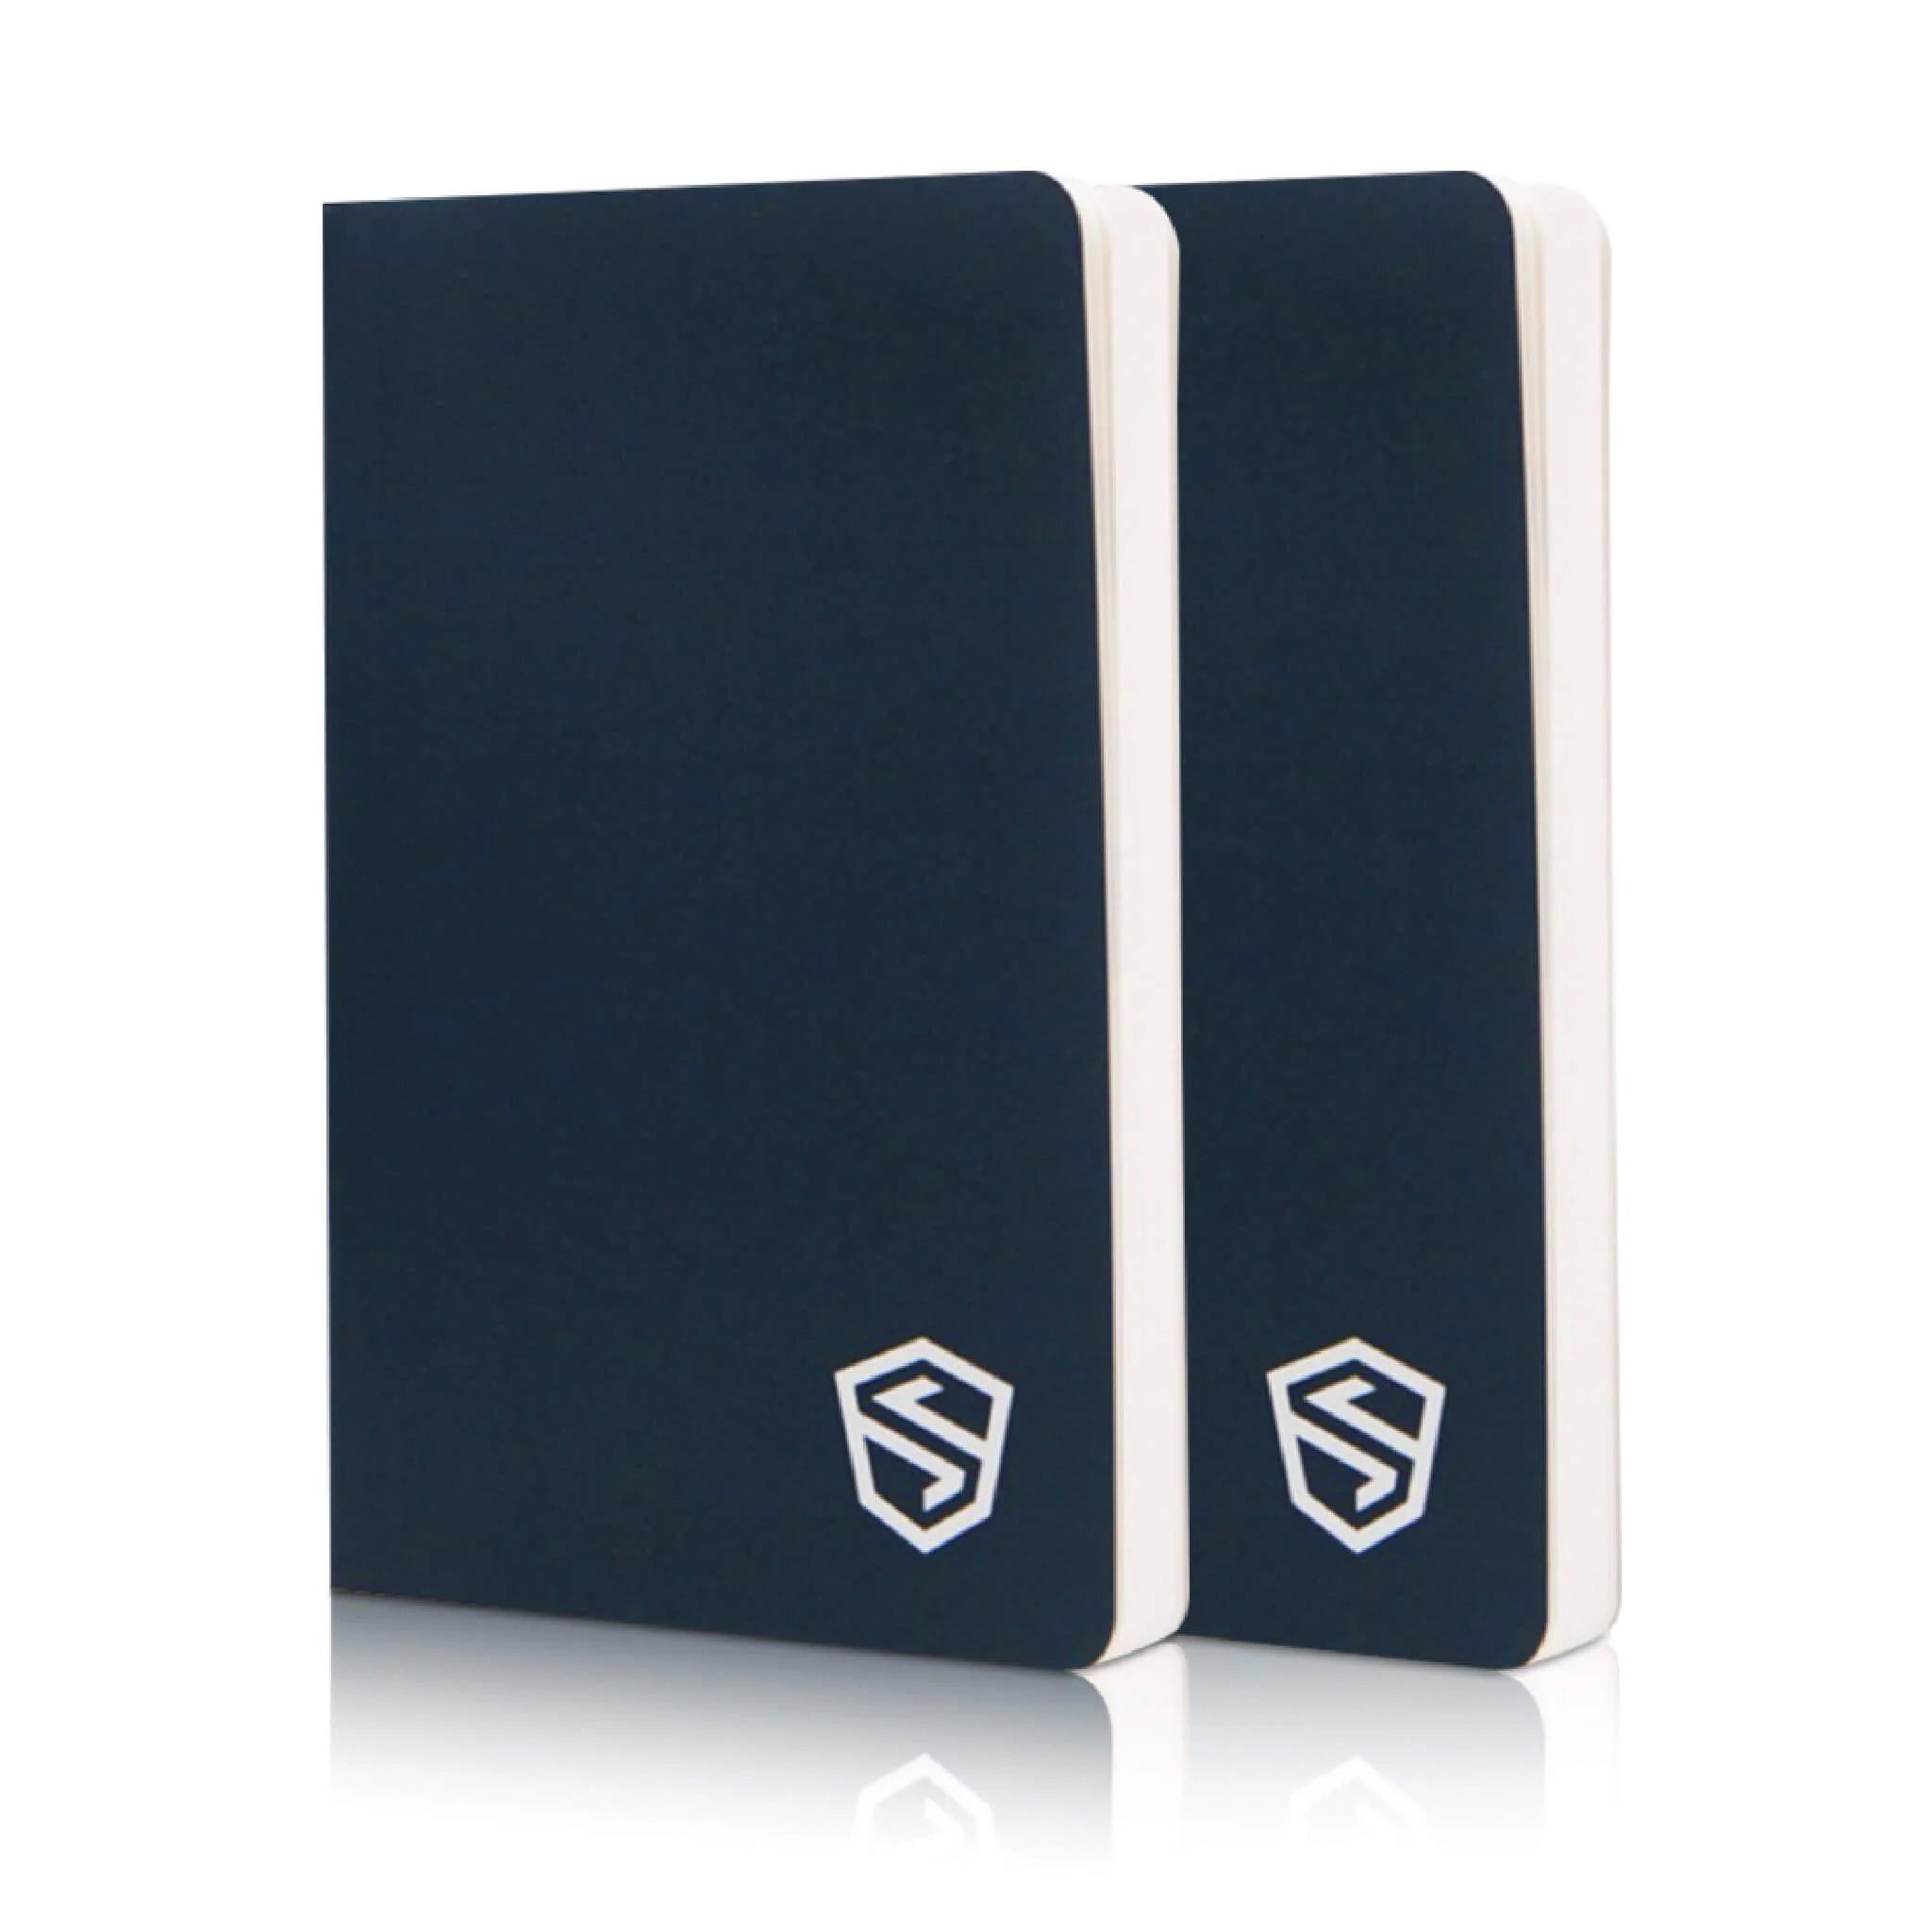 SHIELDFOLIO Stonebook World's Most Secure Crypto Password Notebook | Seed Phrase and Private Key Cold Storage Method | Premium Water-Resistant Paper